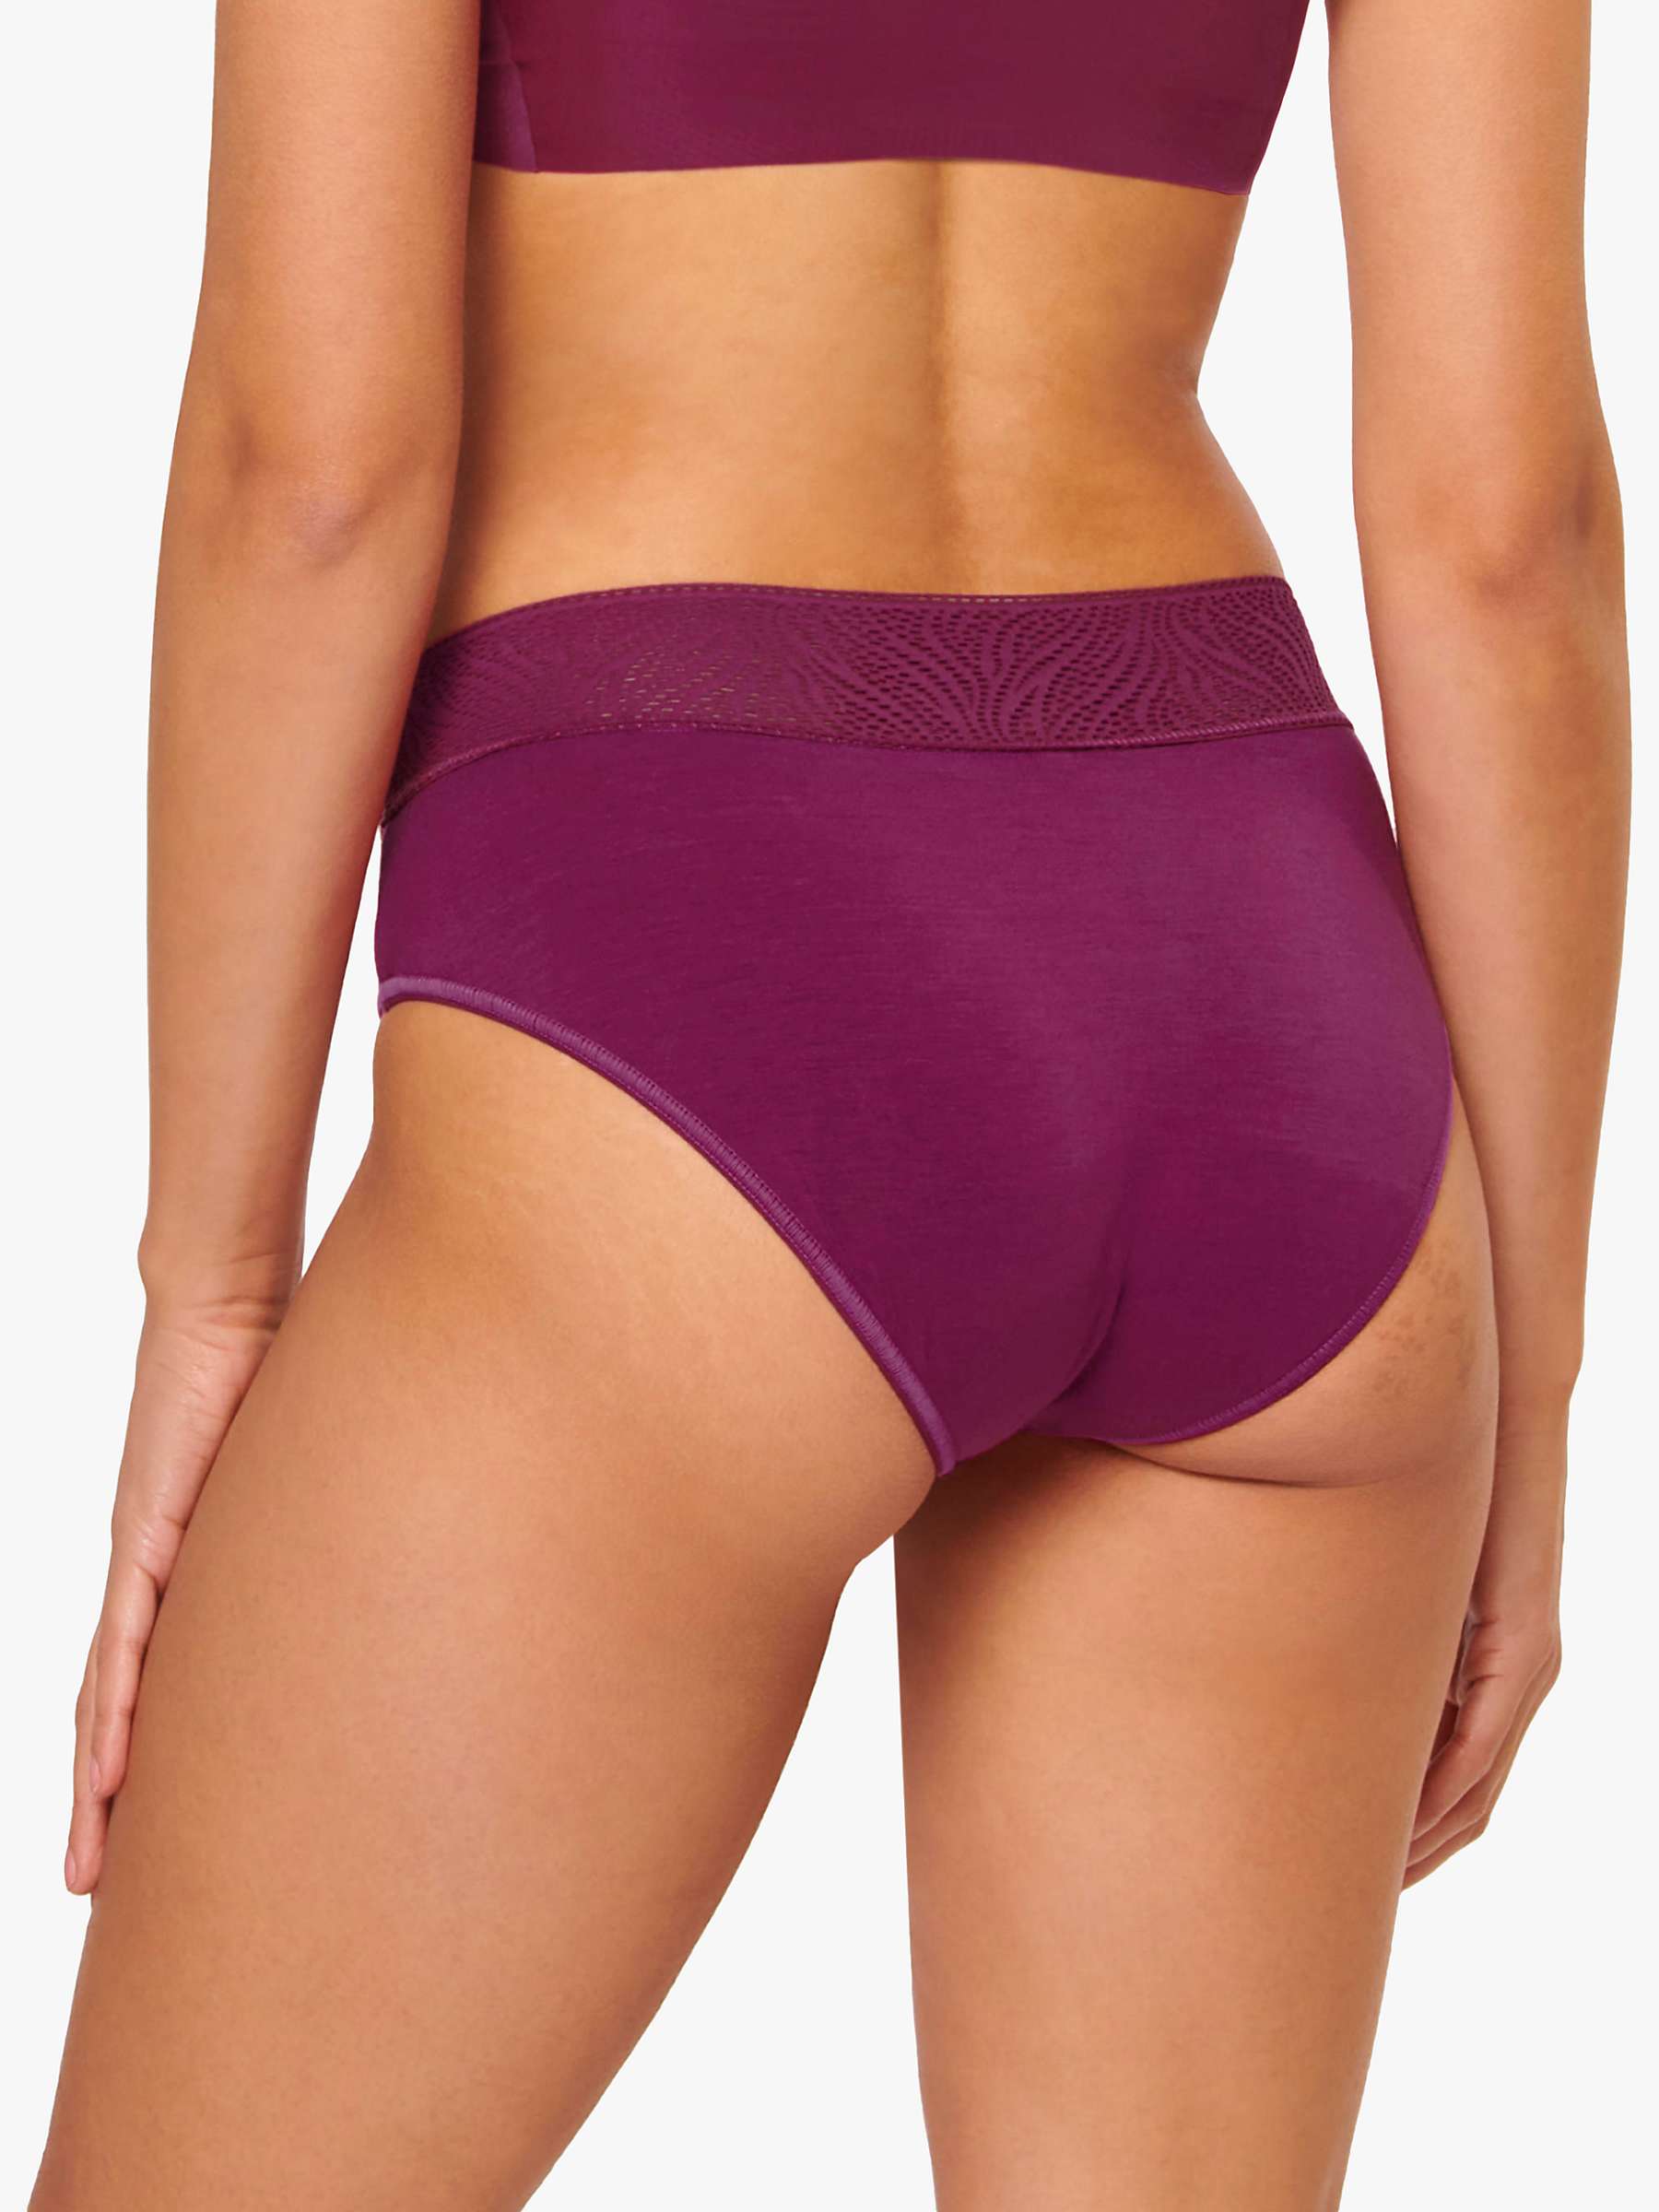 Buy sloggi Light Absorbency Hipster Period Knickers, Pack of 2 Online at johnlewis.com